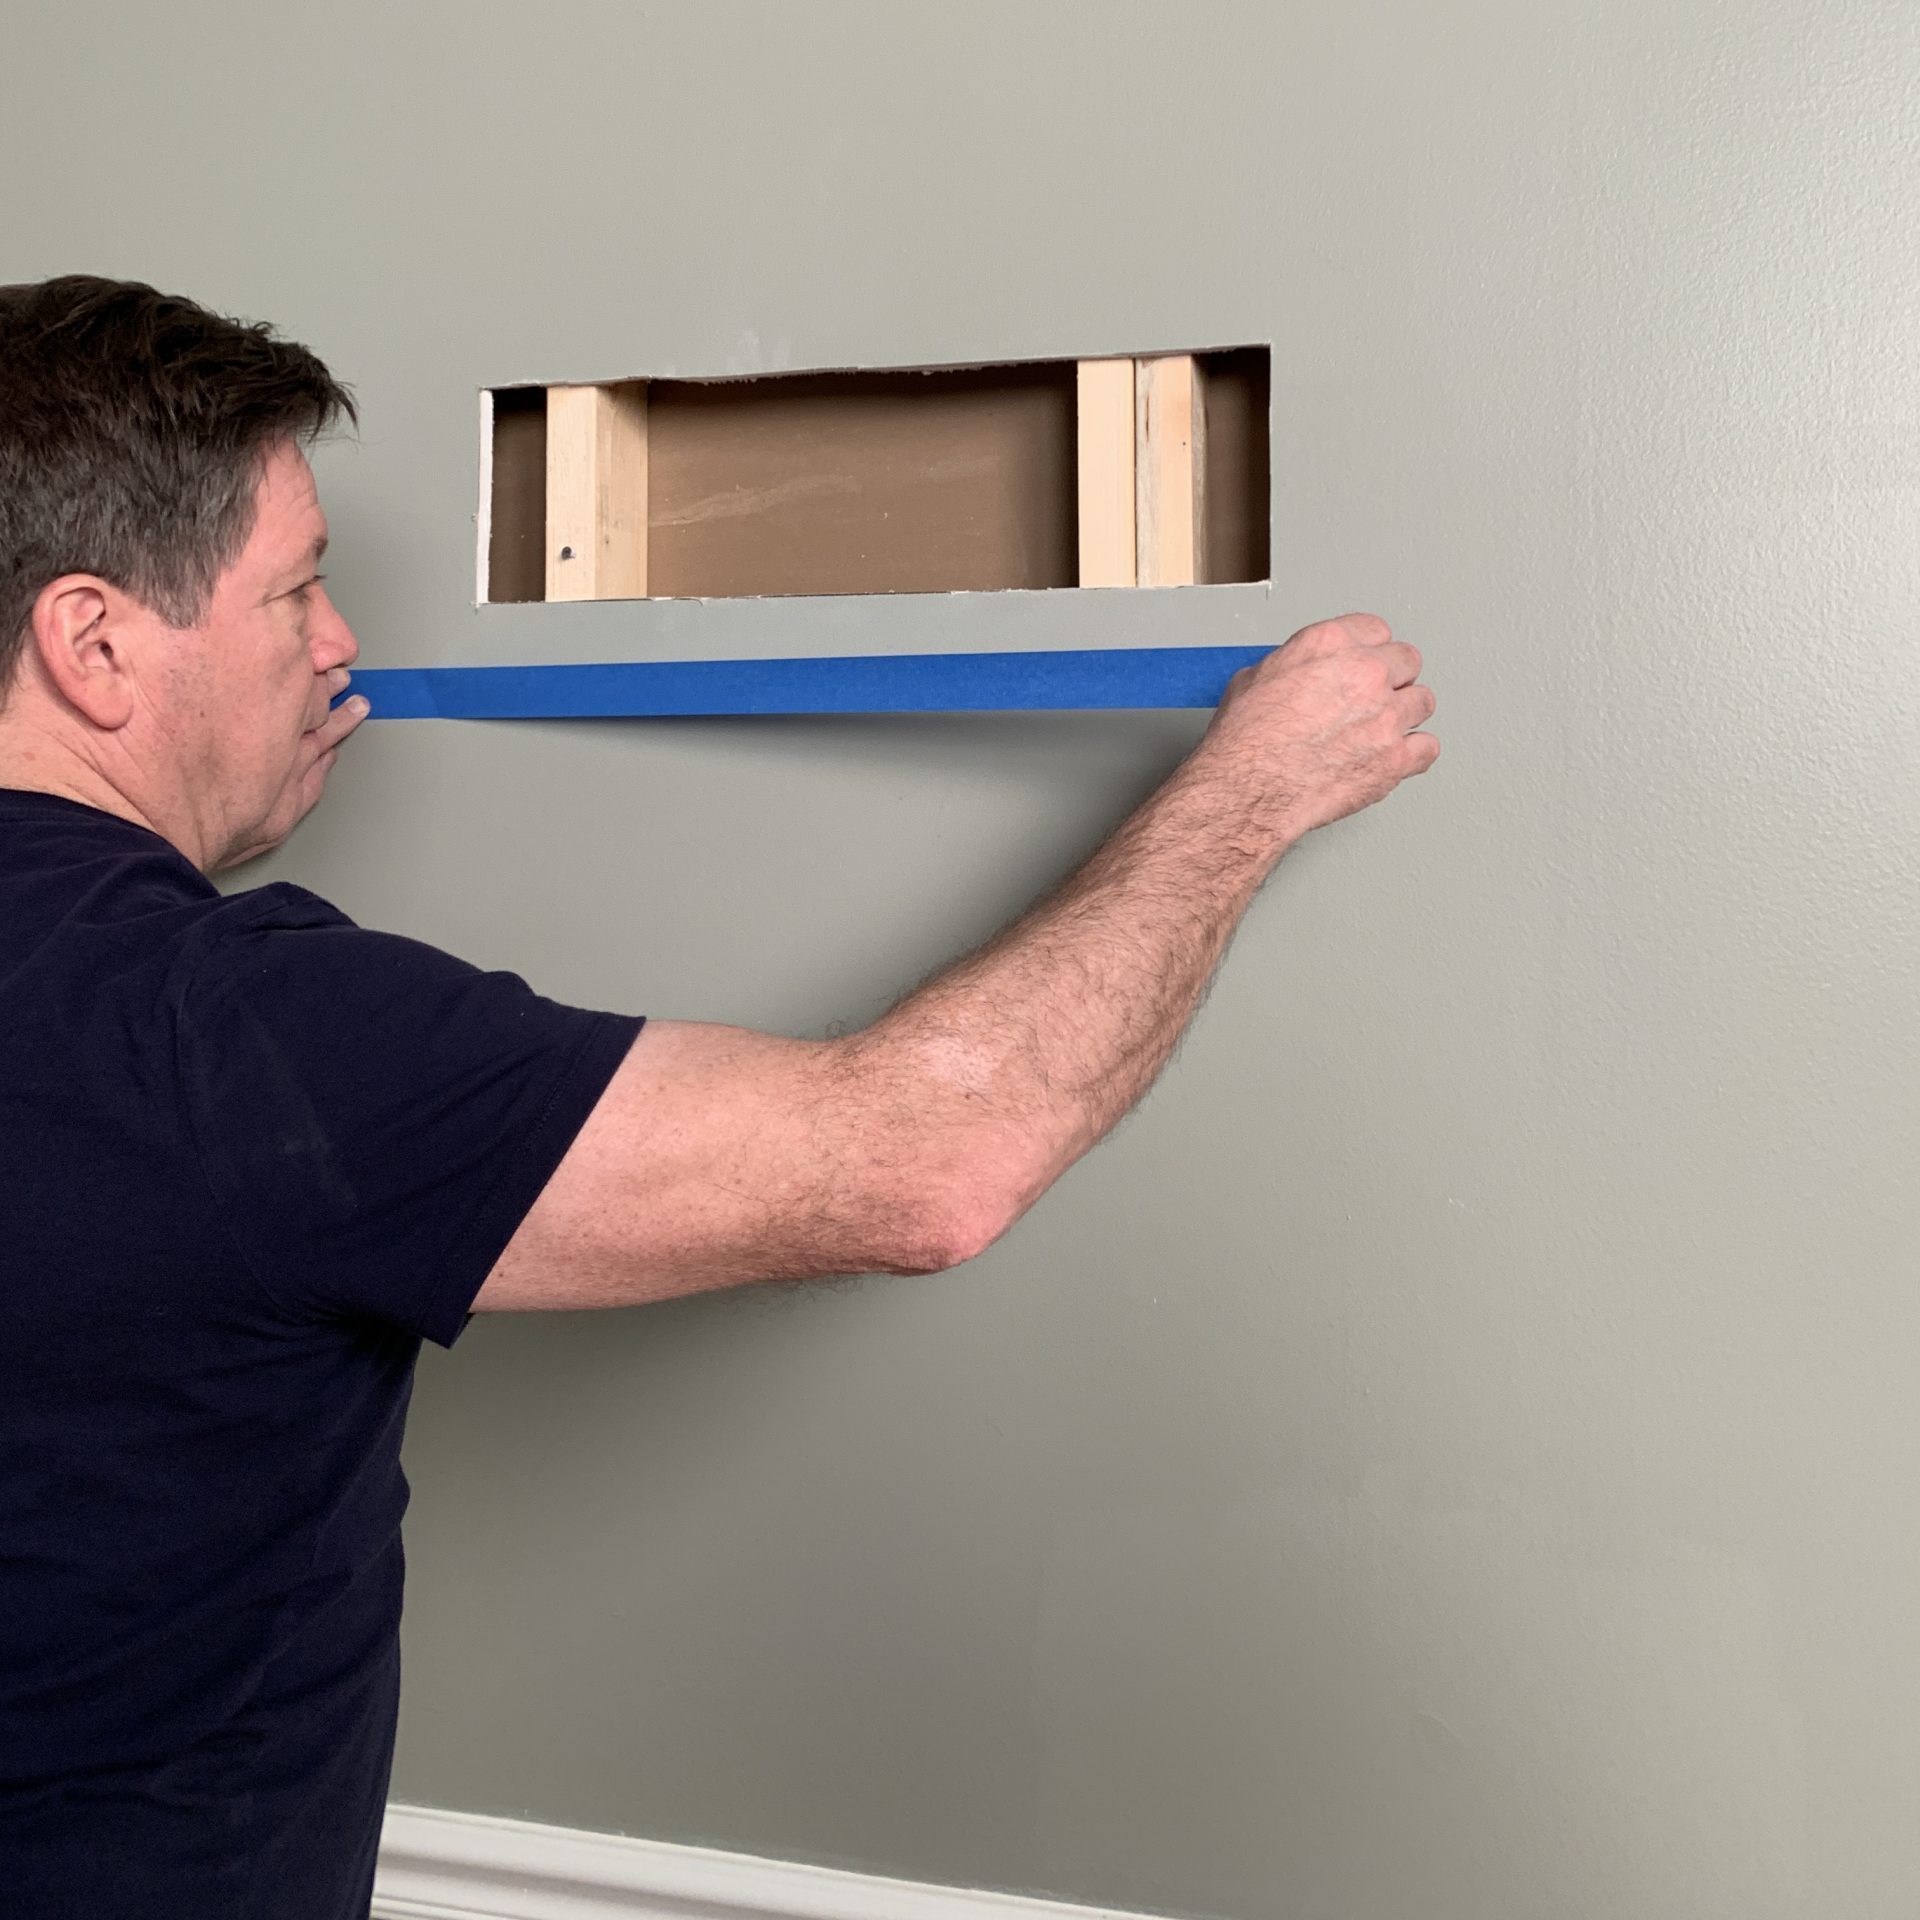 How To Find Studs In A Wall Without a Stud Finder — It's Easier Than You  Think!